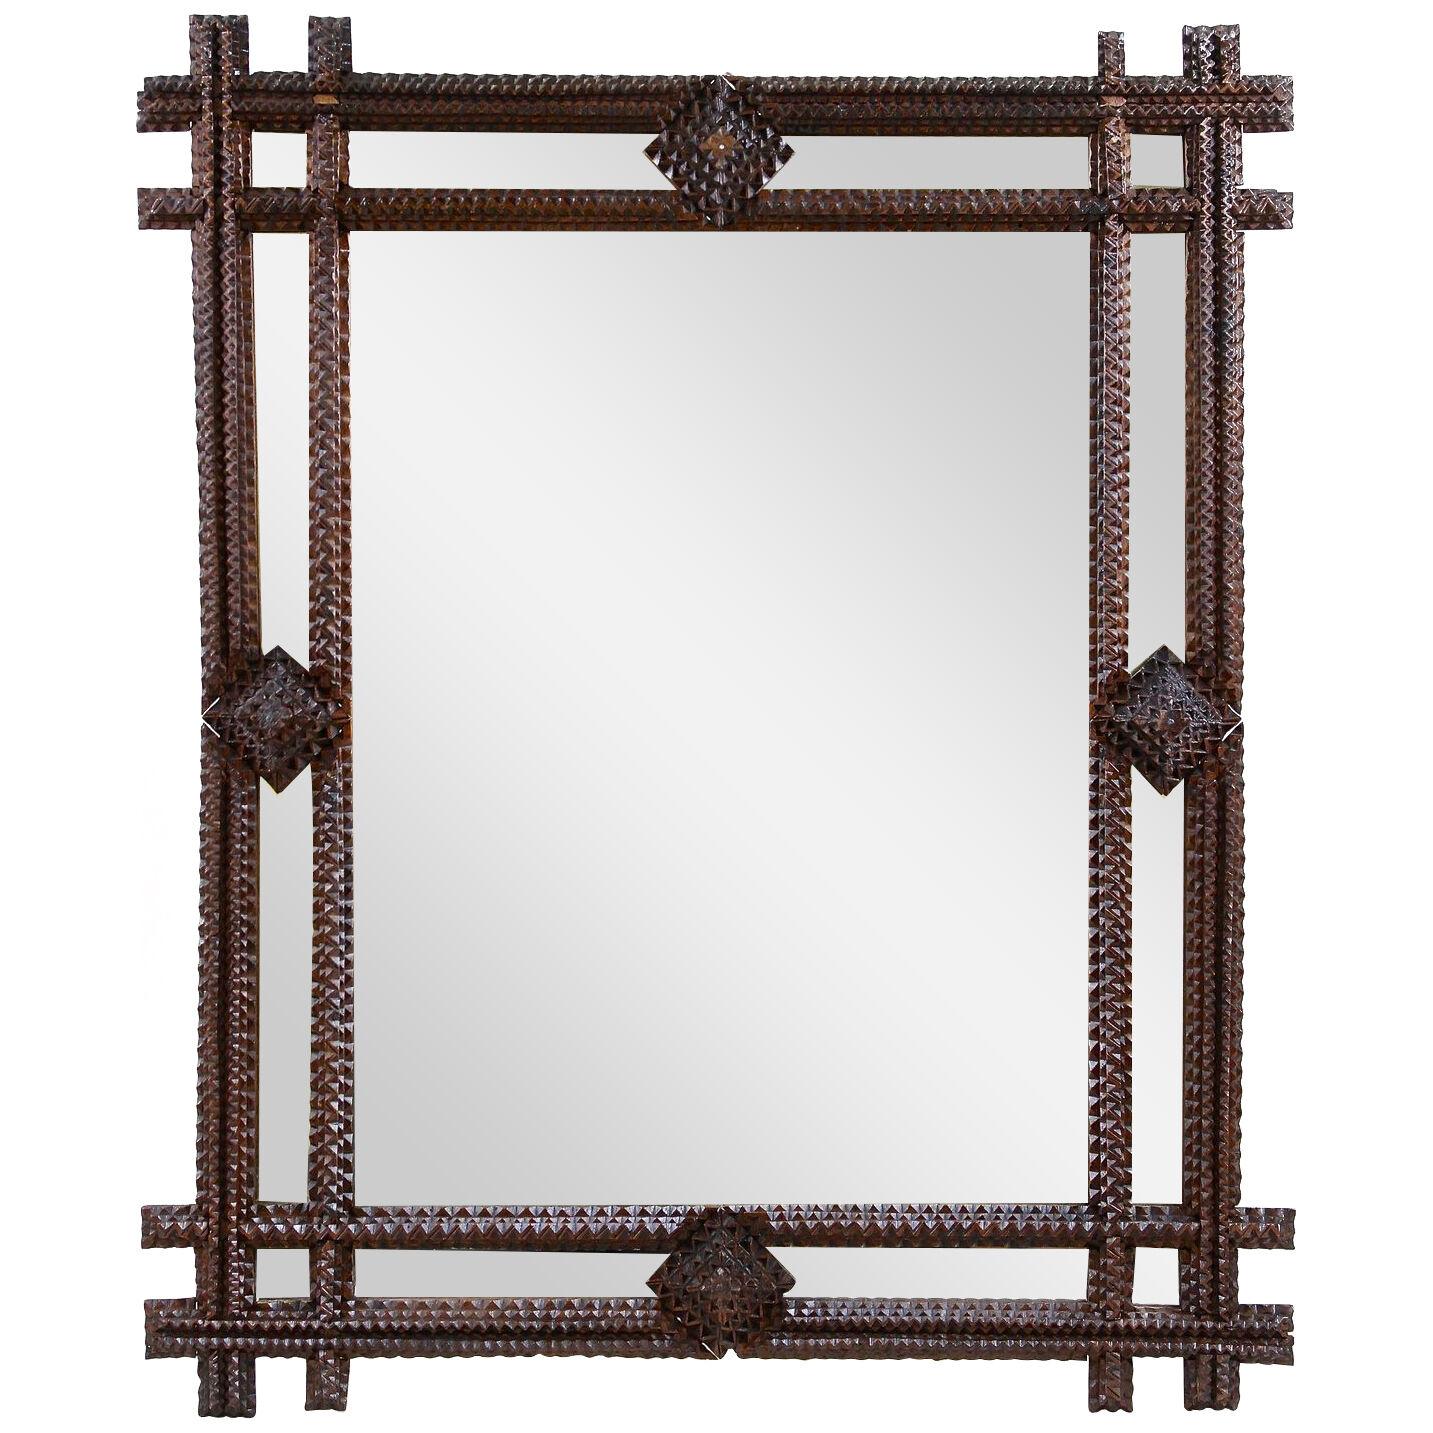 Rustic Tramp Art Wall Mirror With , Handcarved, Austria circa 1880